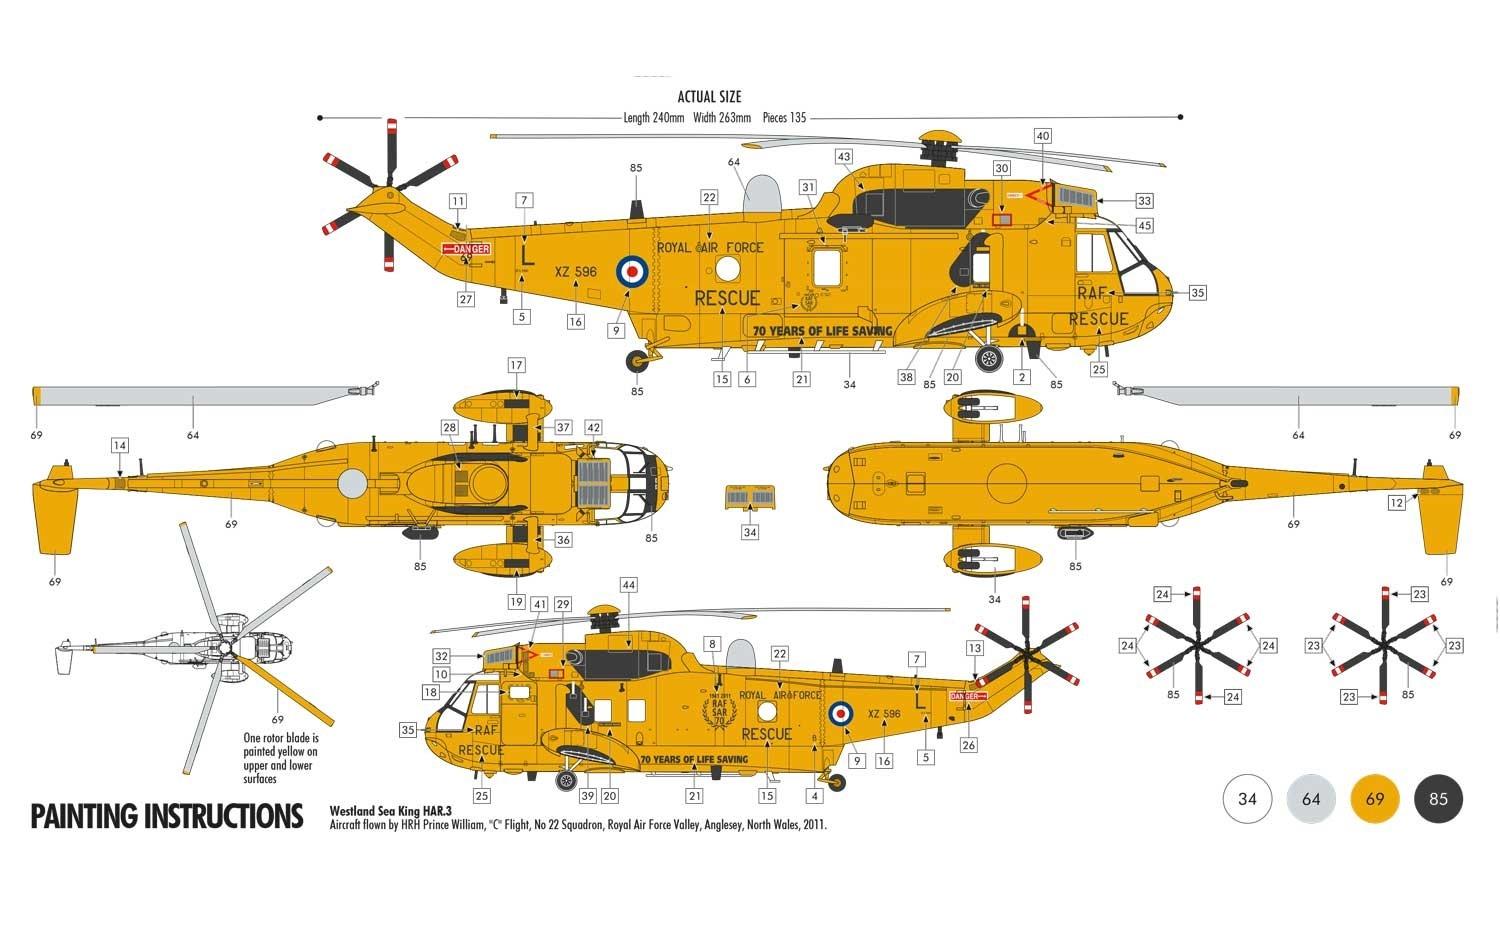 Instructions for the paintinng of the model Sea King helicopter.